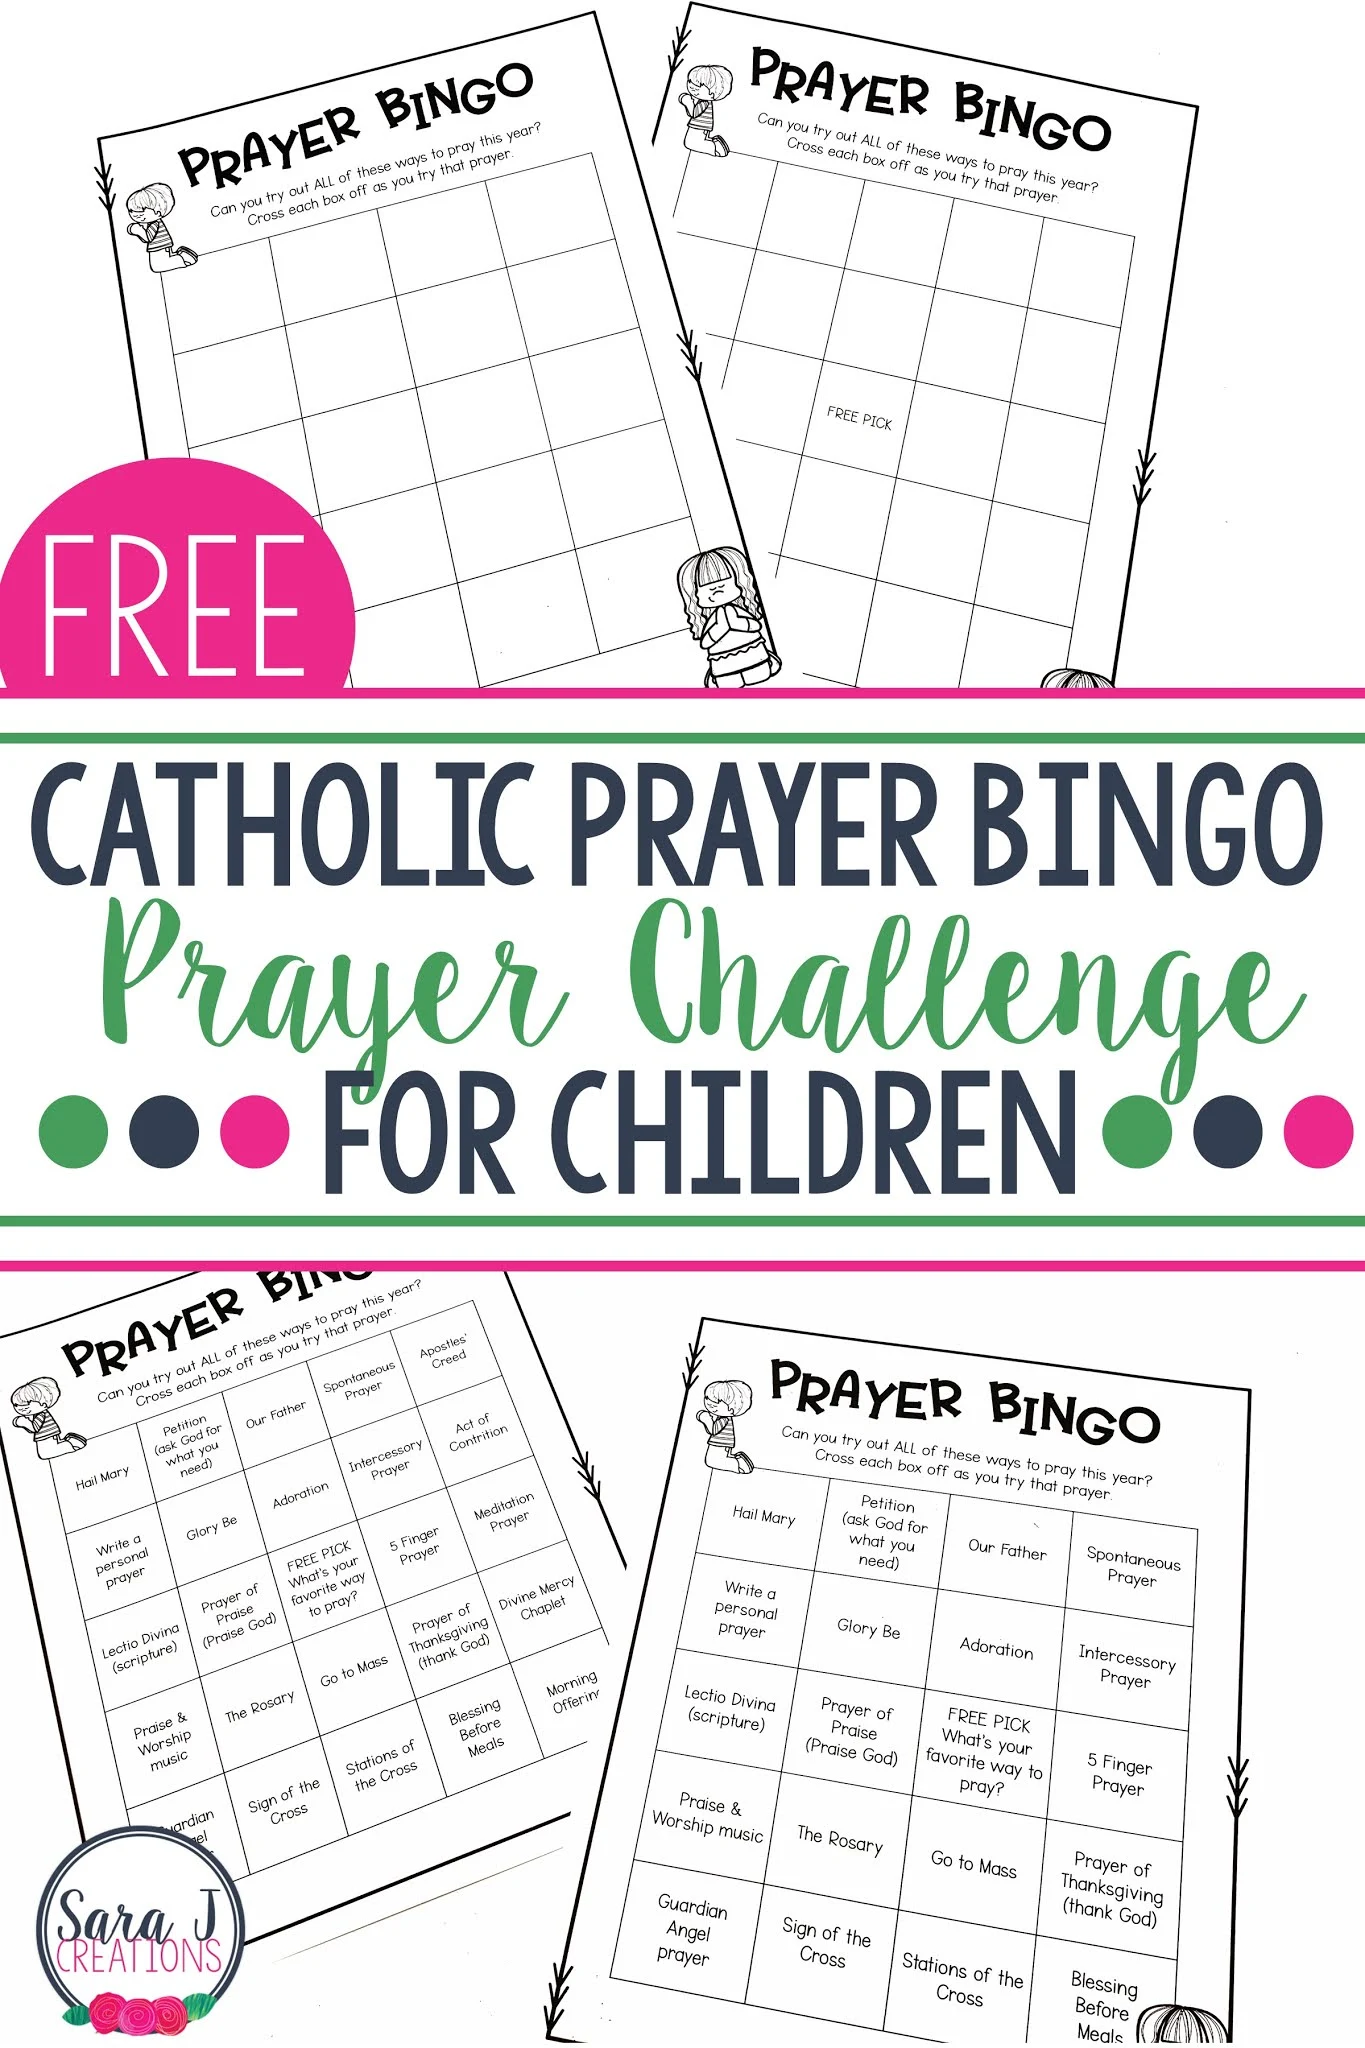 Free Catholic prayer bingo to help kids learn about and try all different kinds of prayer